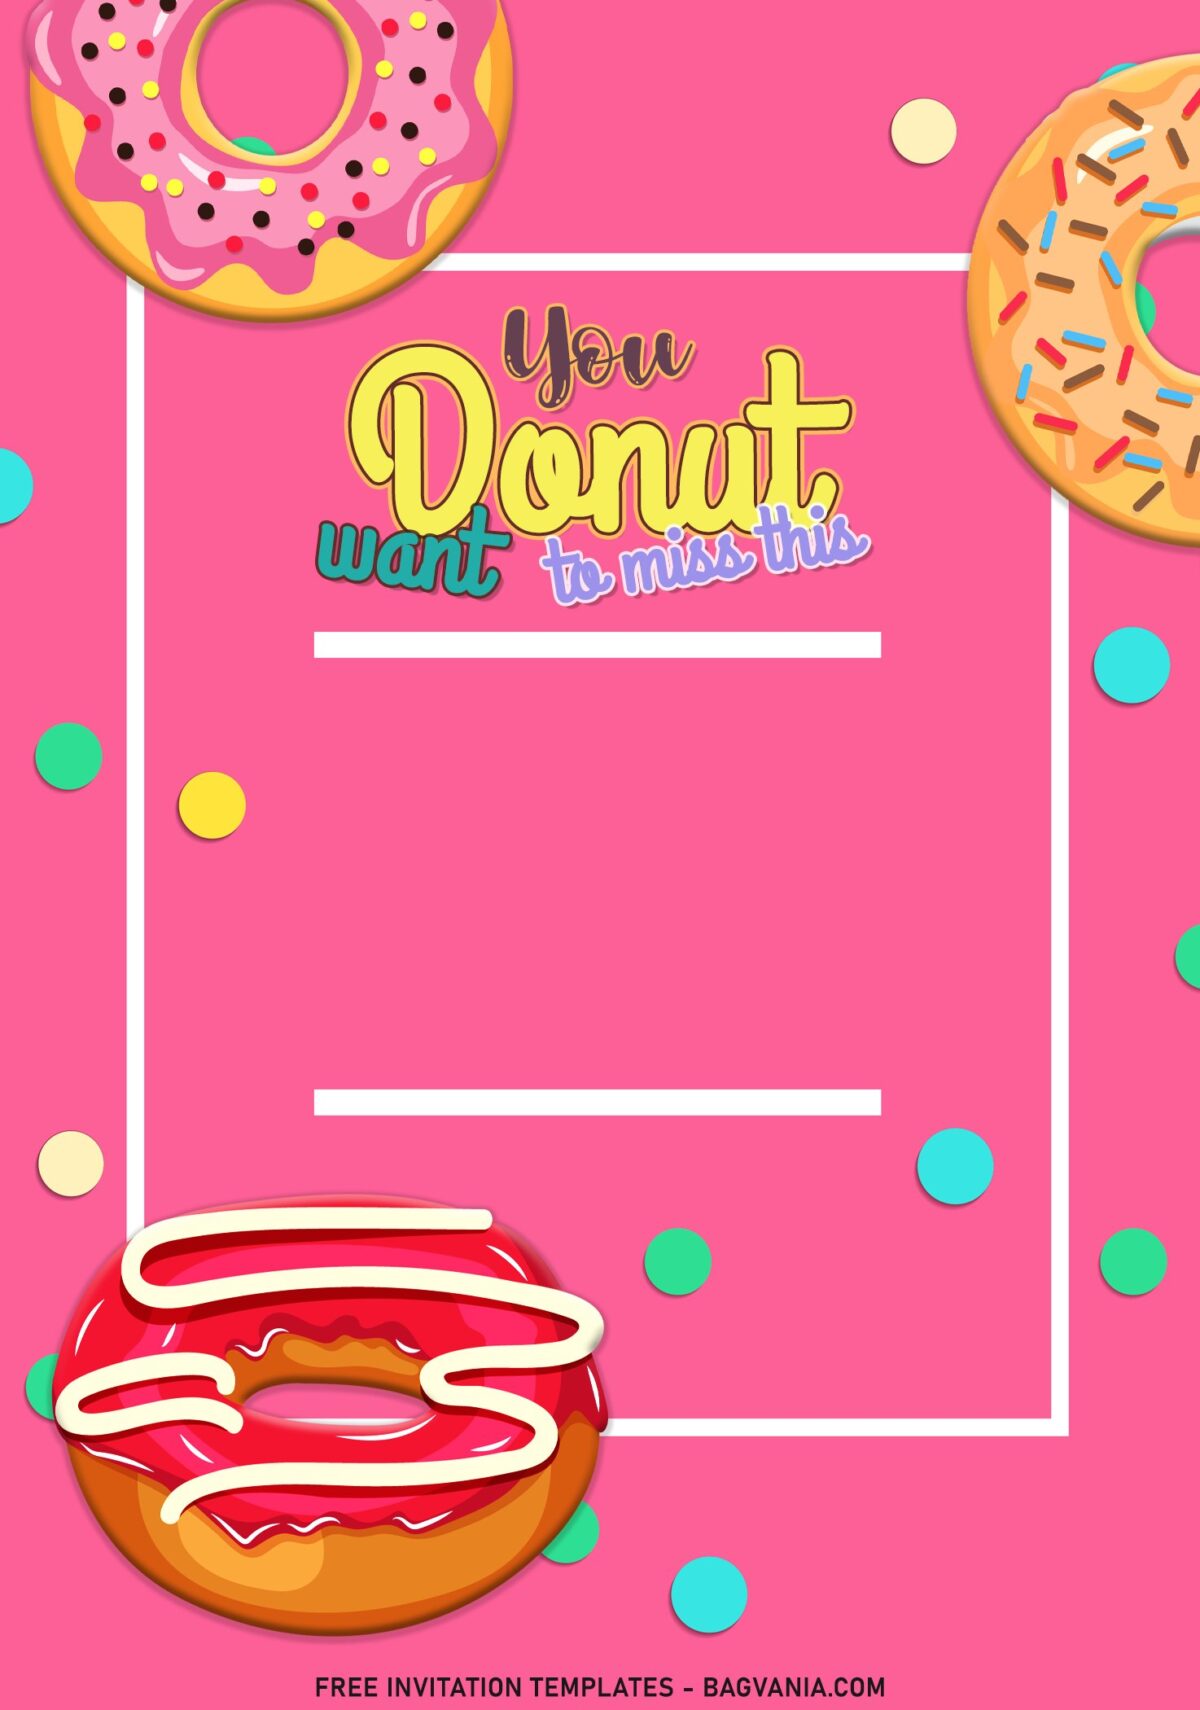 7+ Donut And Sprinkle Invitation Templates For Your Cute Little Girl's Birthday with cute pink theme and background